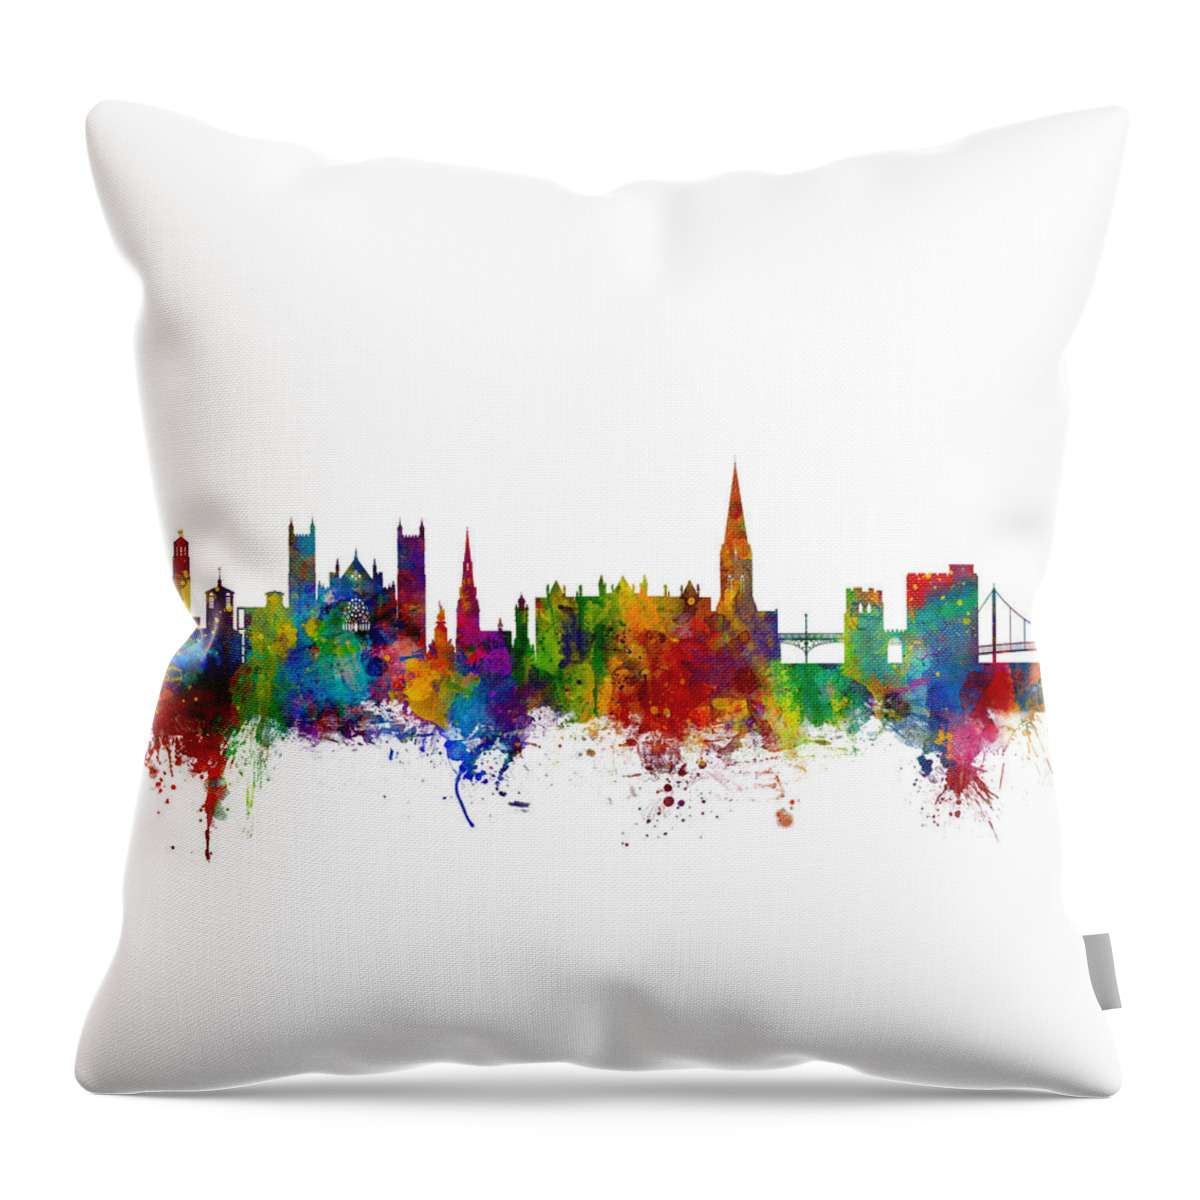 Exeter Throw Pillow featuring the digital art Exeter England Skyline by Michael Tompsett